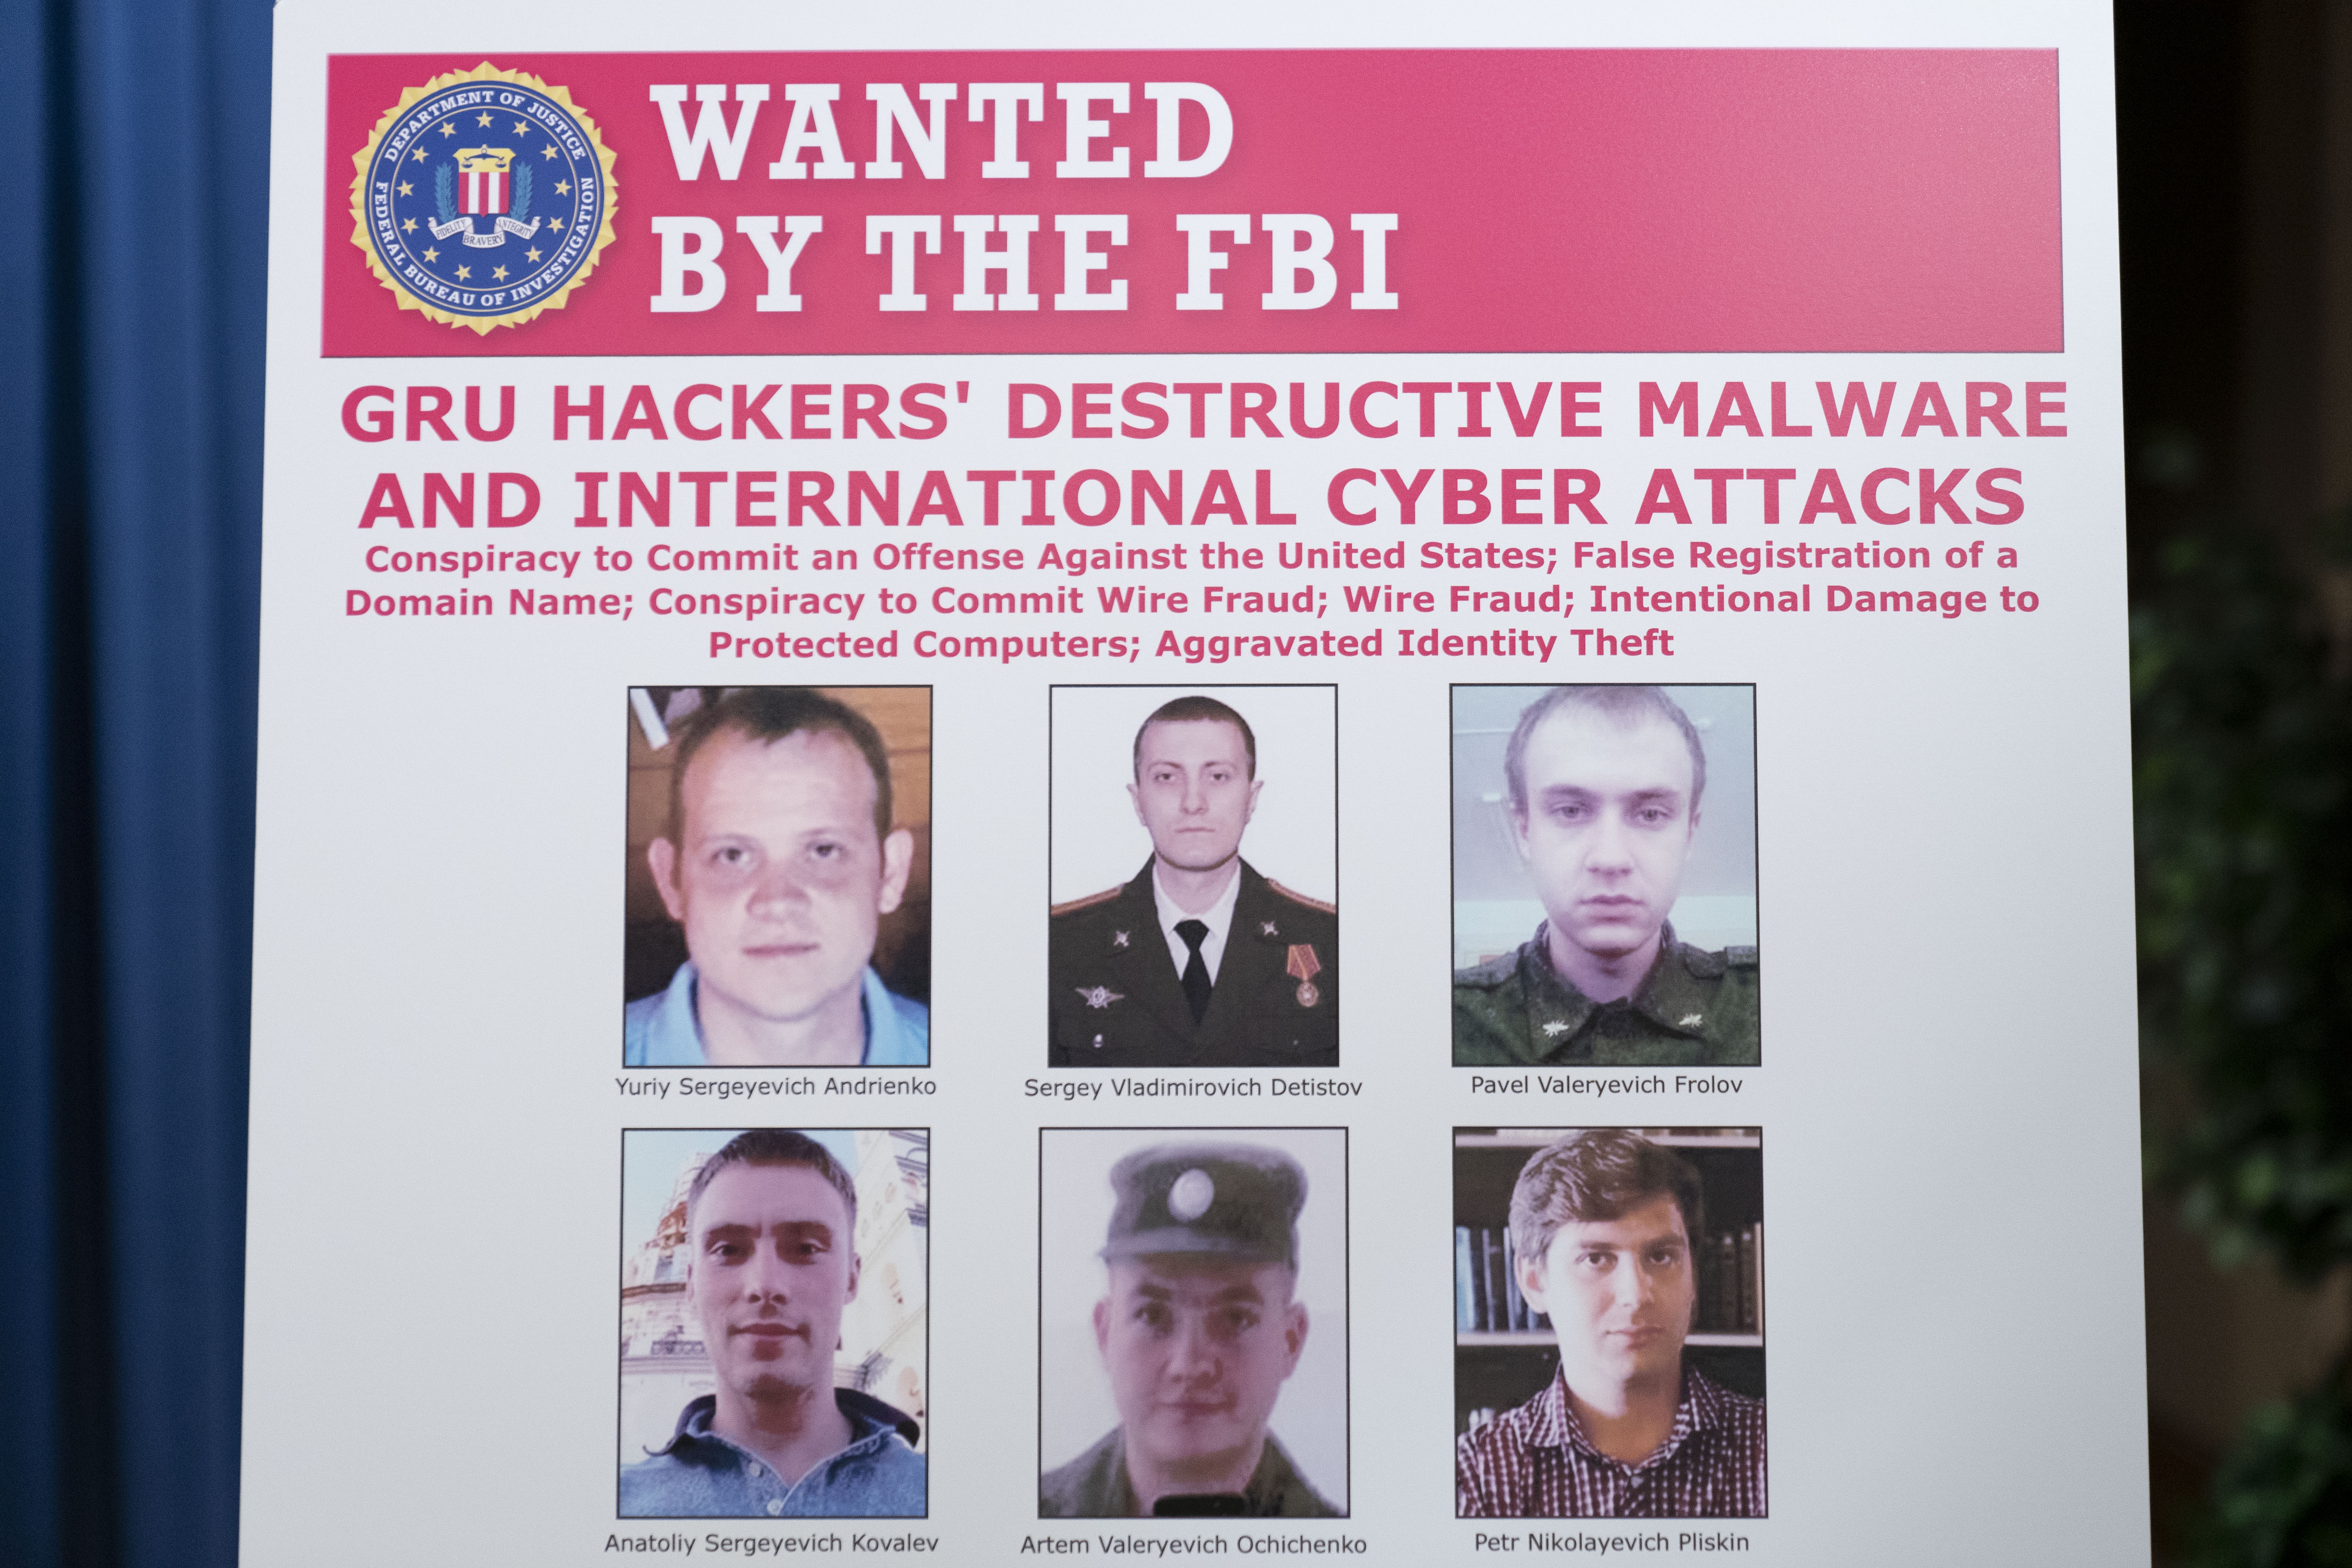 An October 2020 FBI wanted poster for Russian hackers